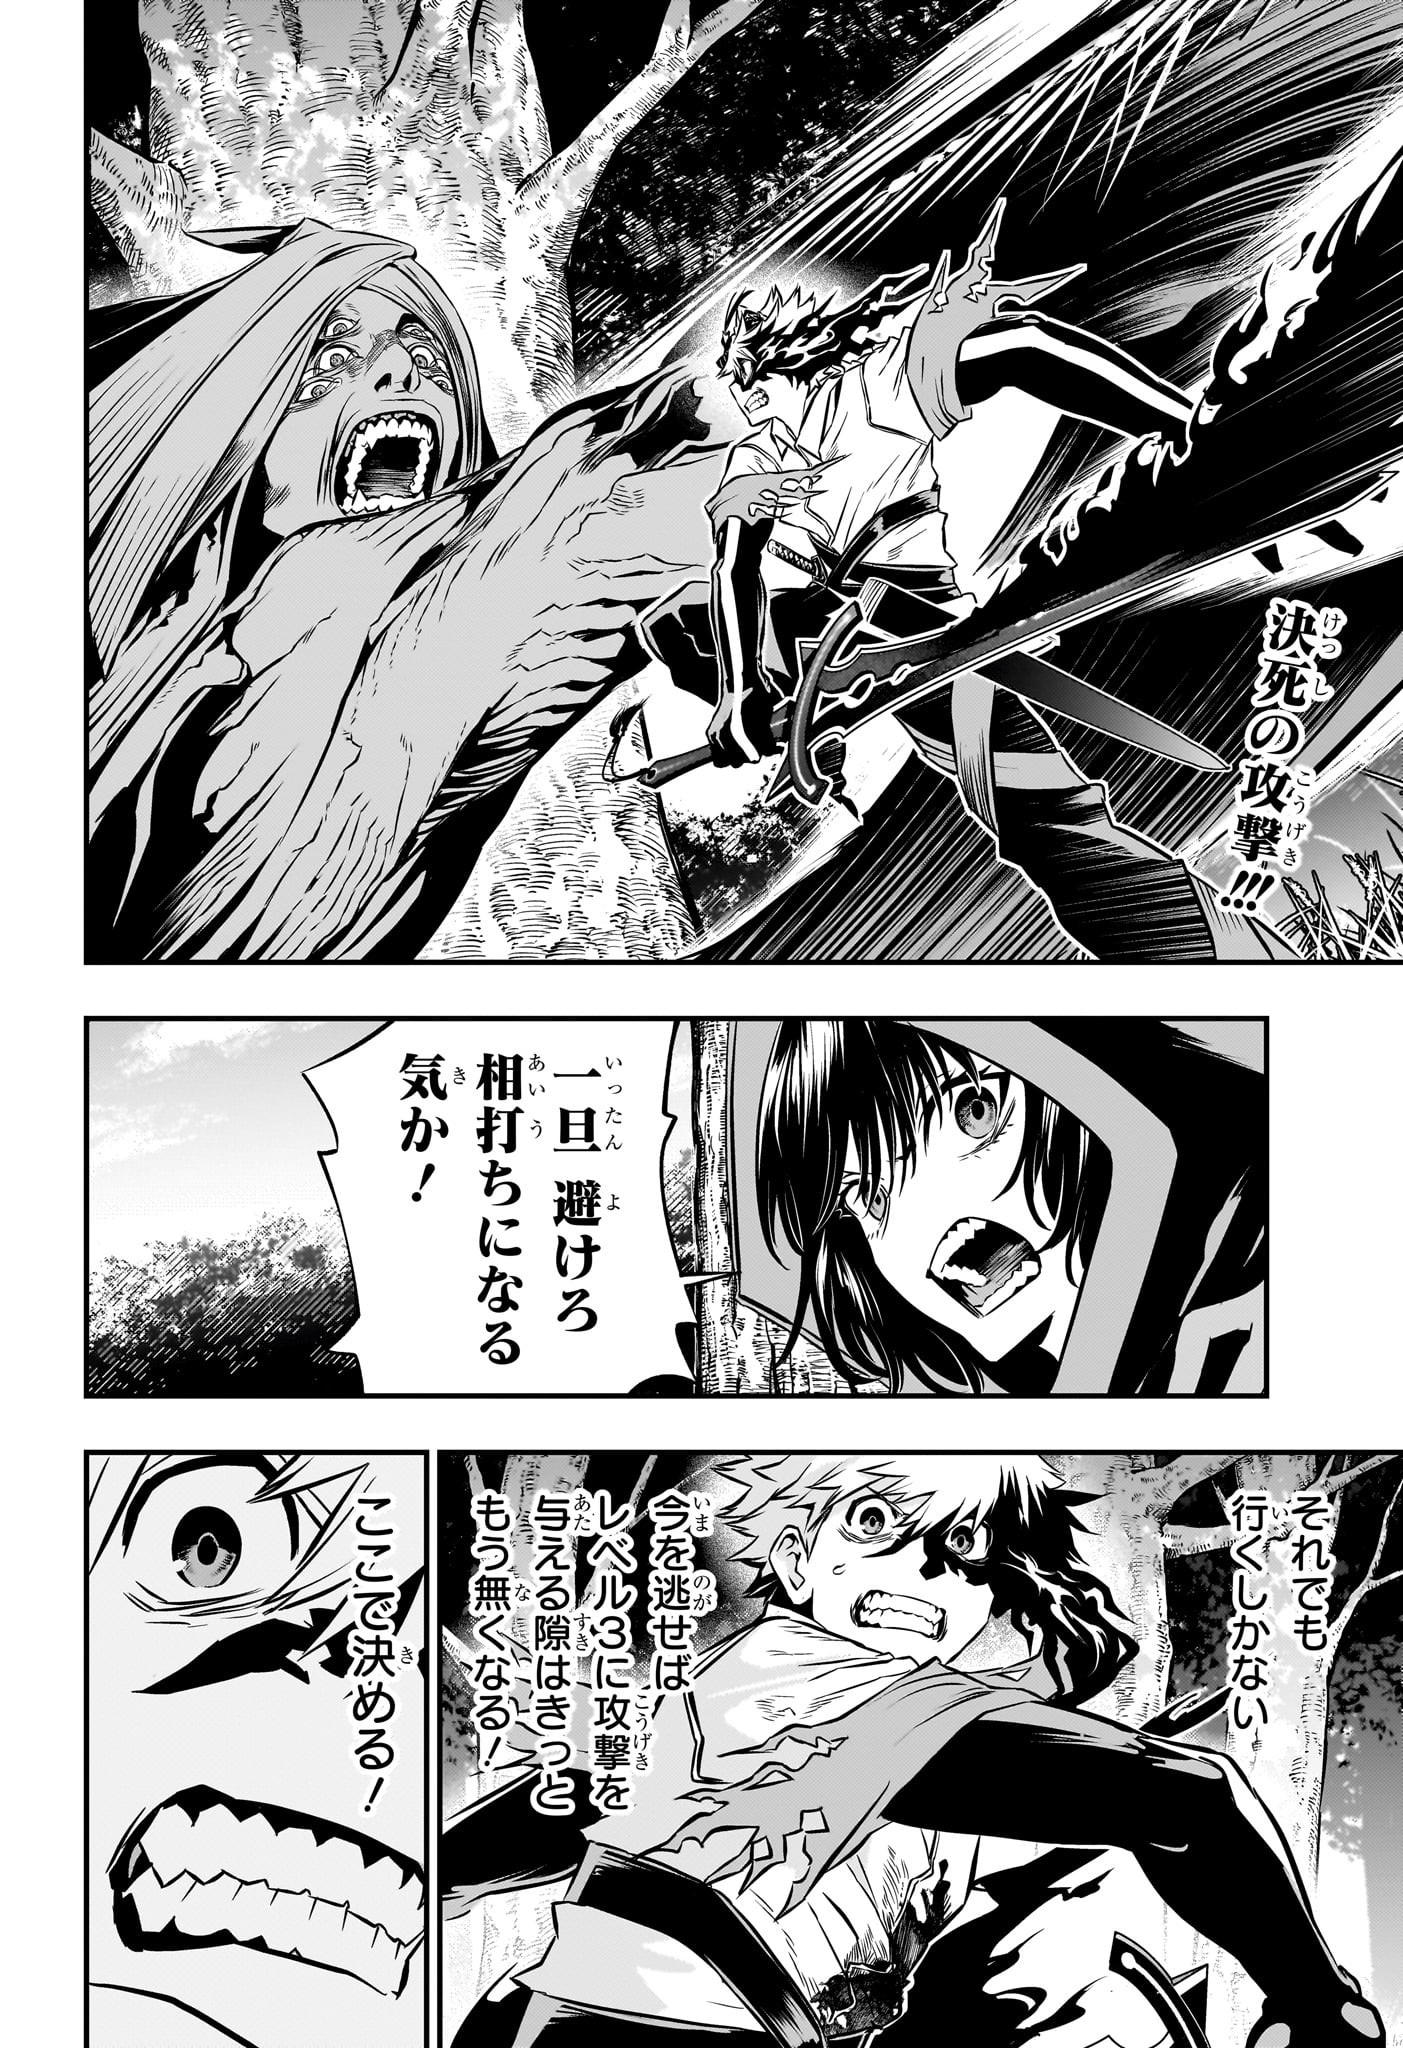 Nue no Onmyouji - Chapter 38 - Page 2